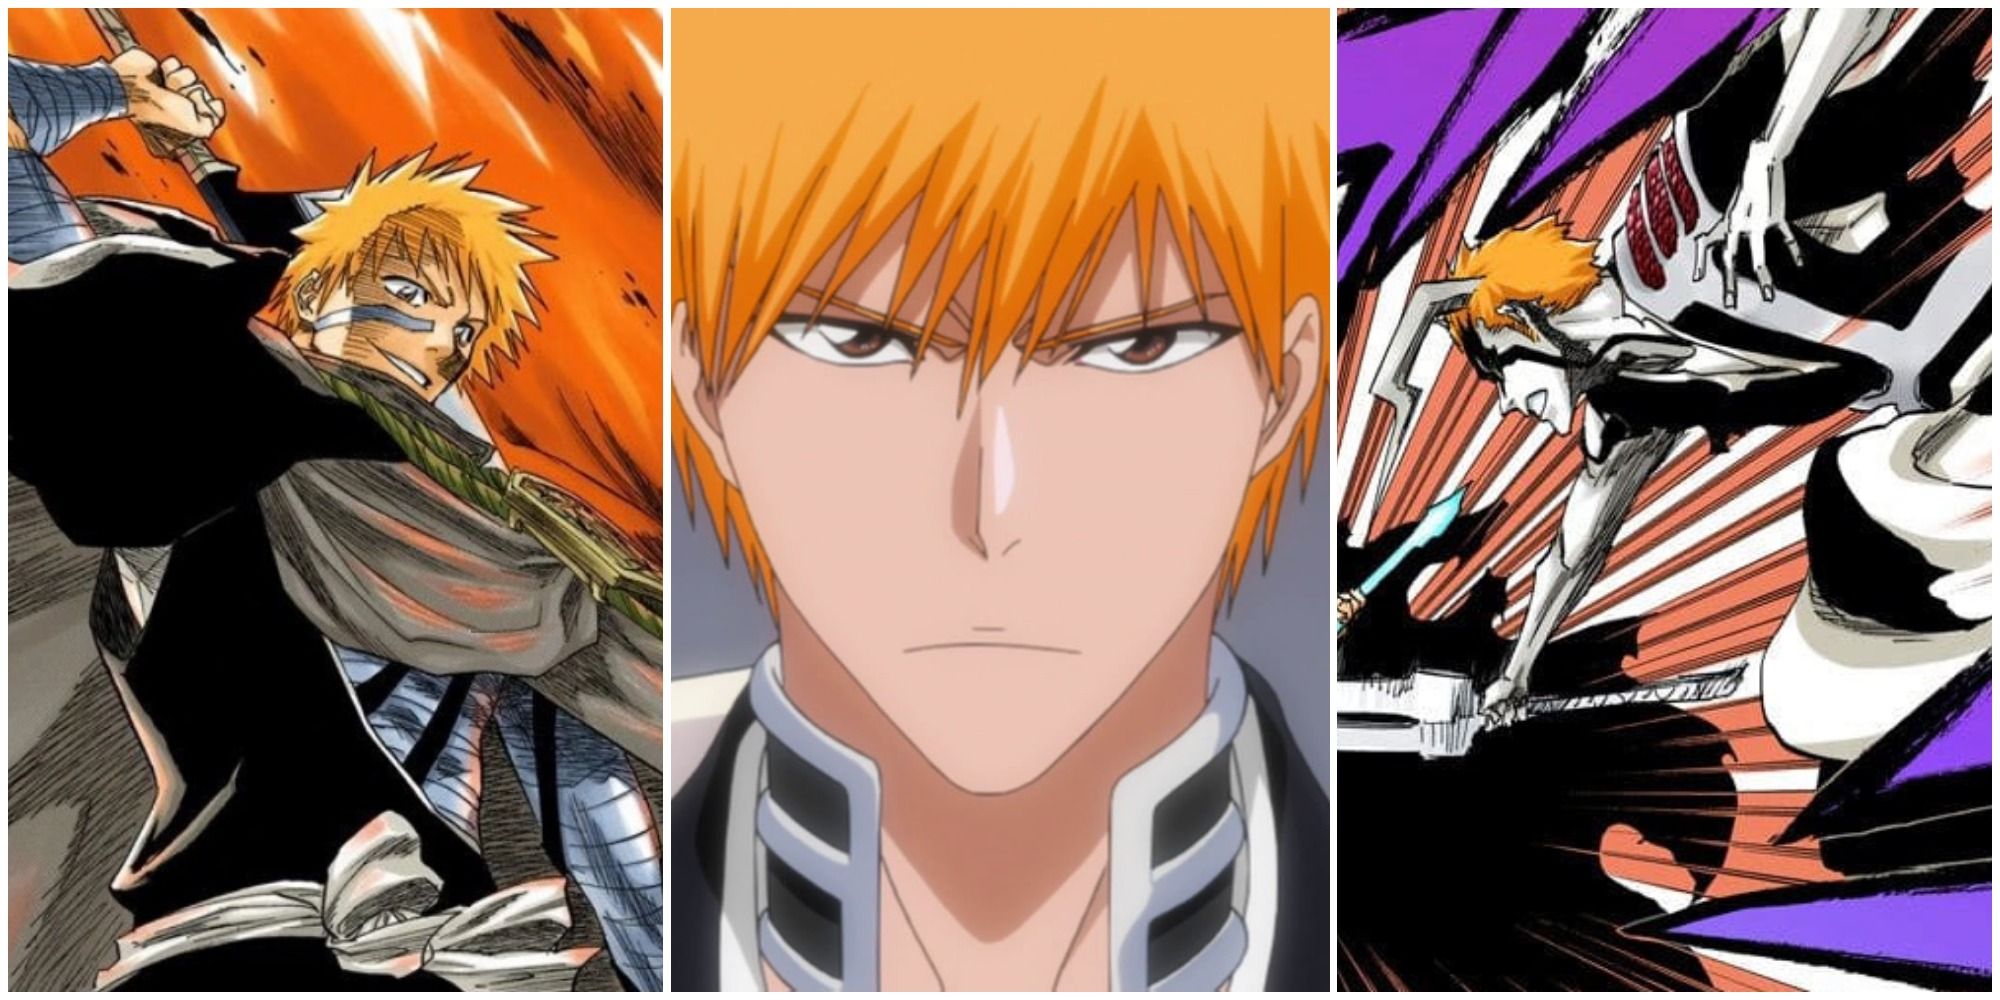 In Bleach, why did Ichigo became a Vasto Lorde after Ulquiorra had